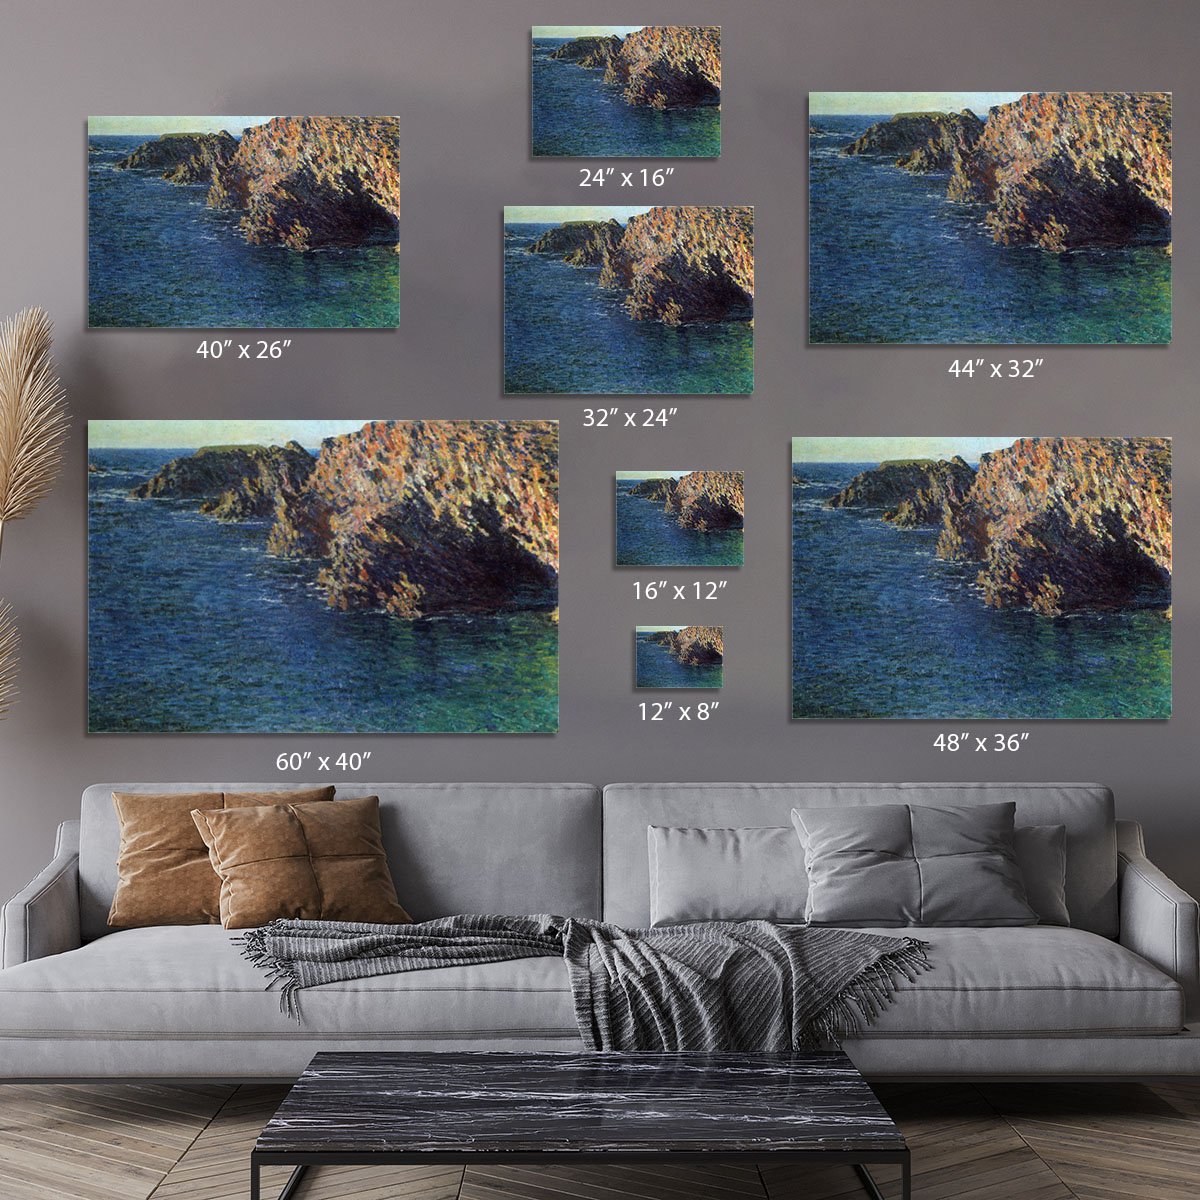 Port Domois by Monet Canvas Print or Poster